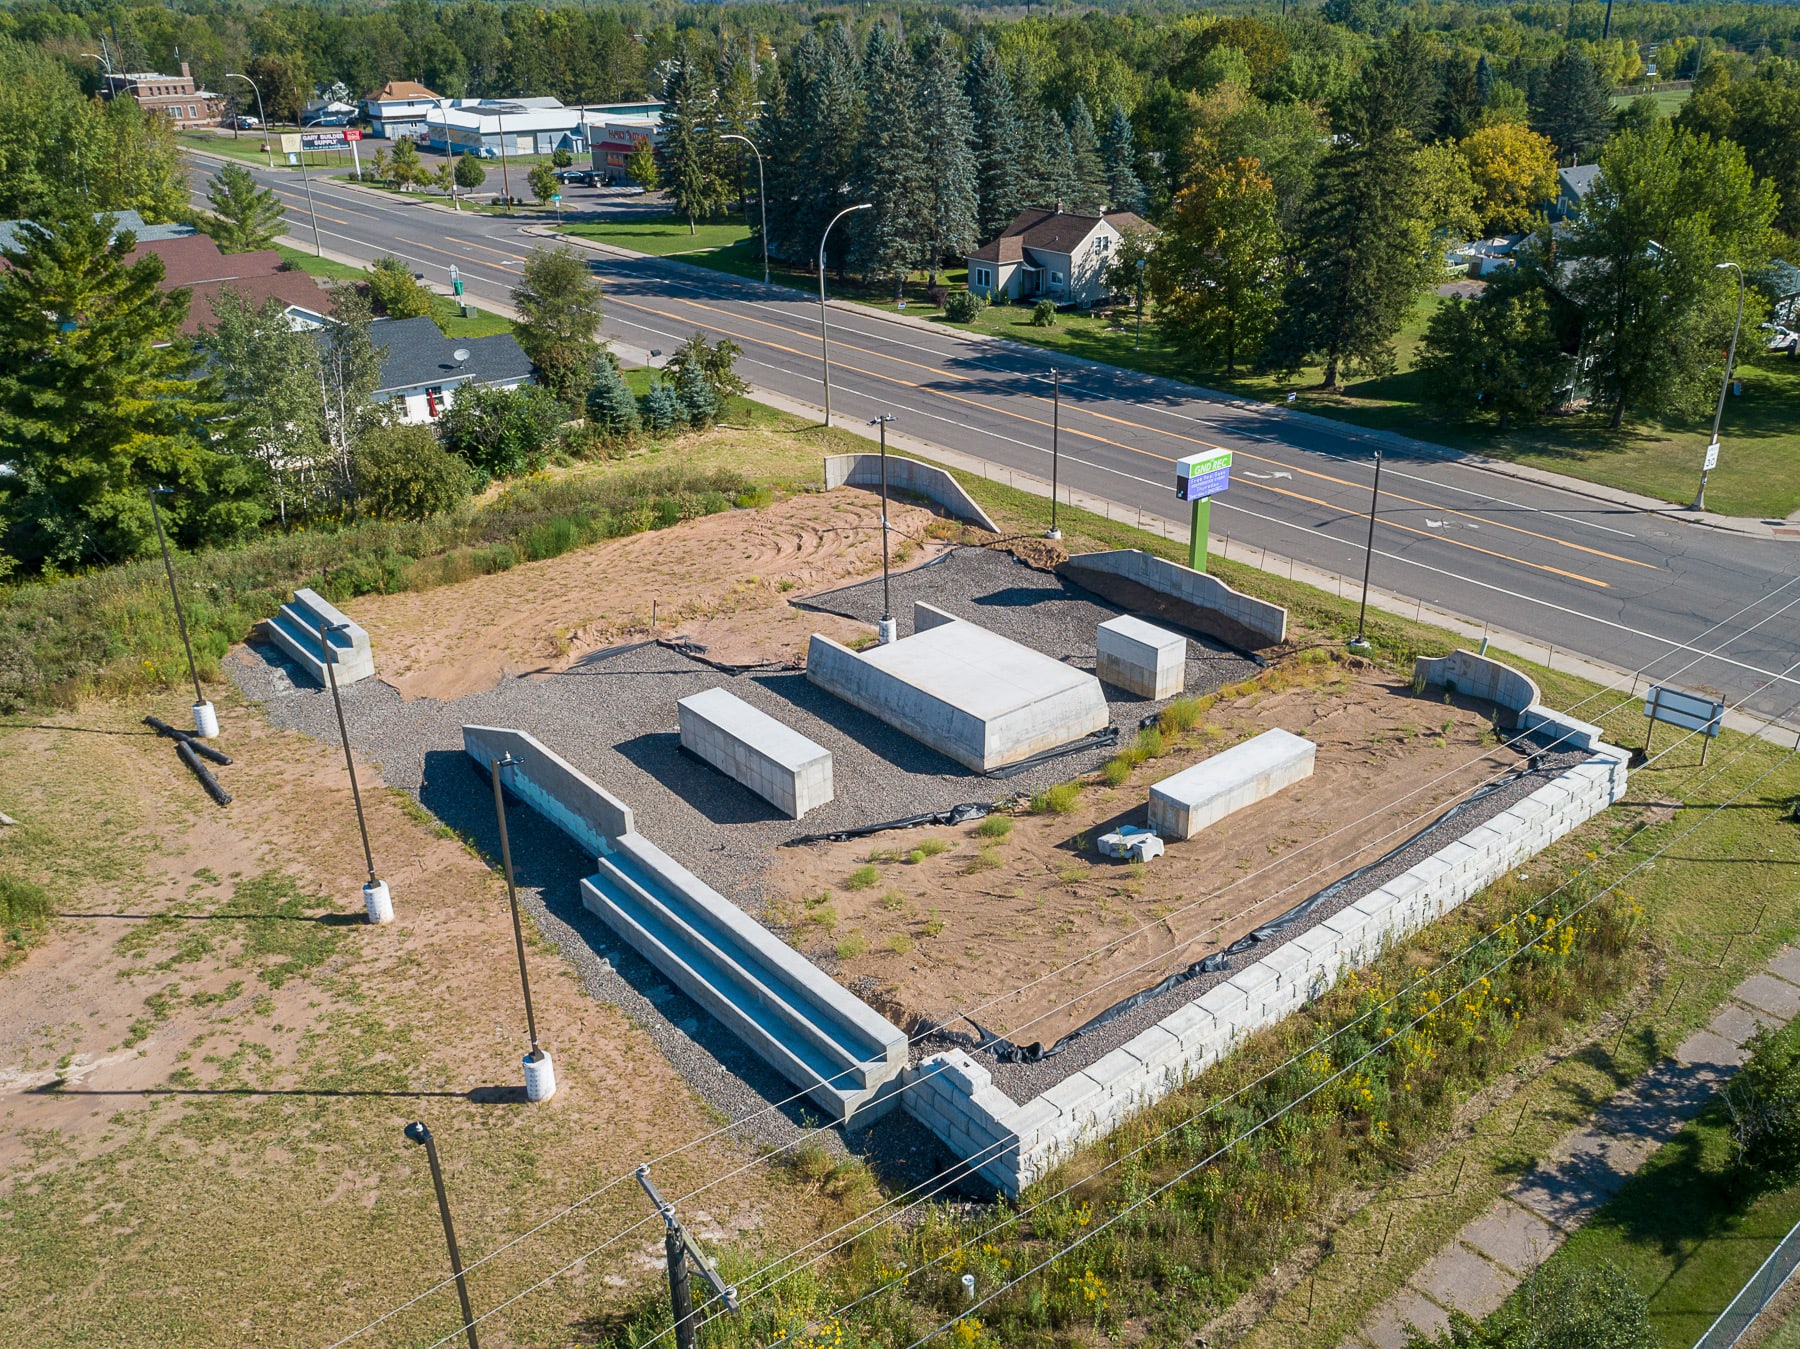 An aerial view of the skatepark at the GND REC